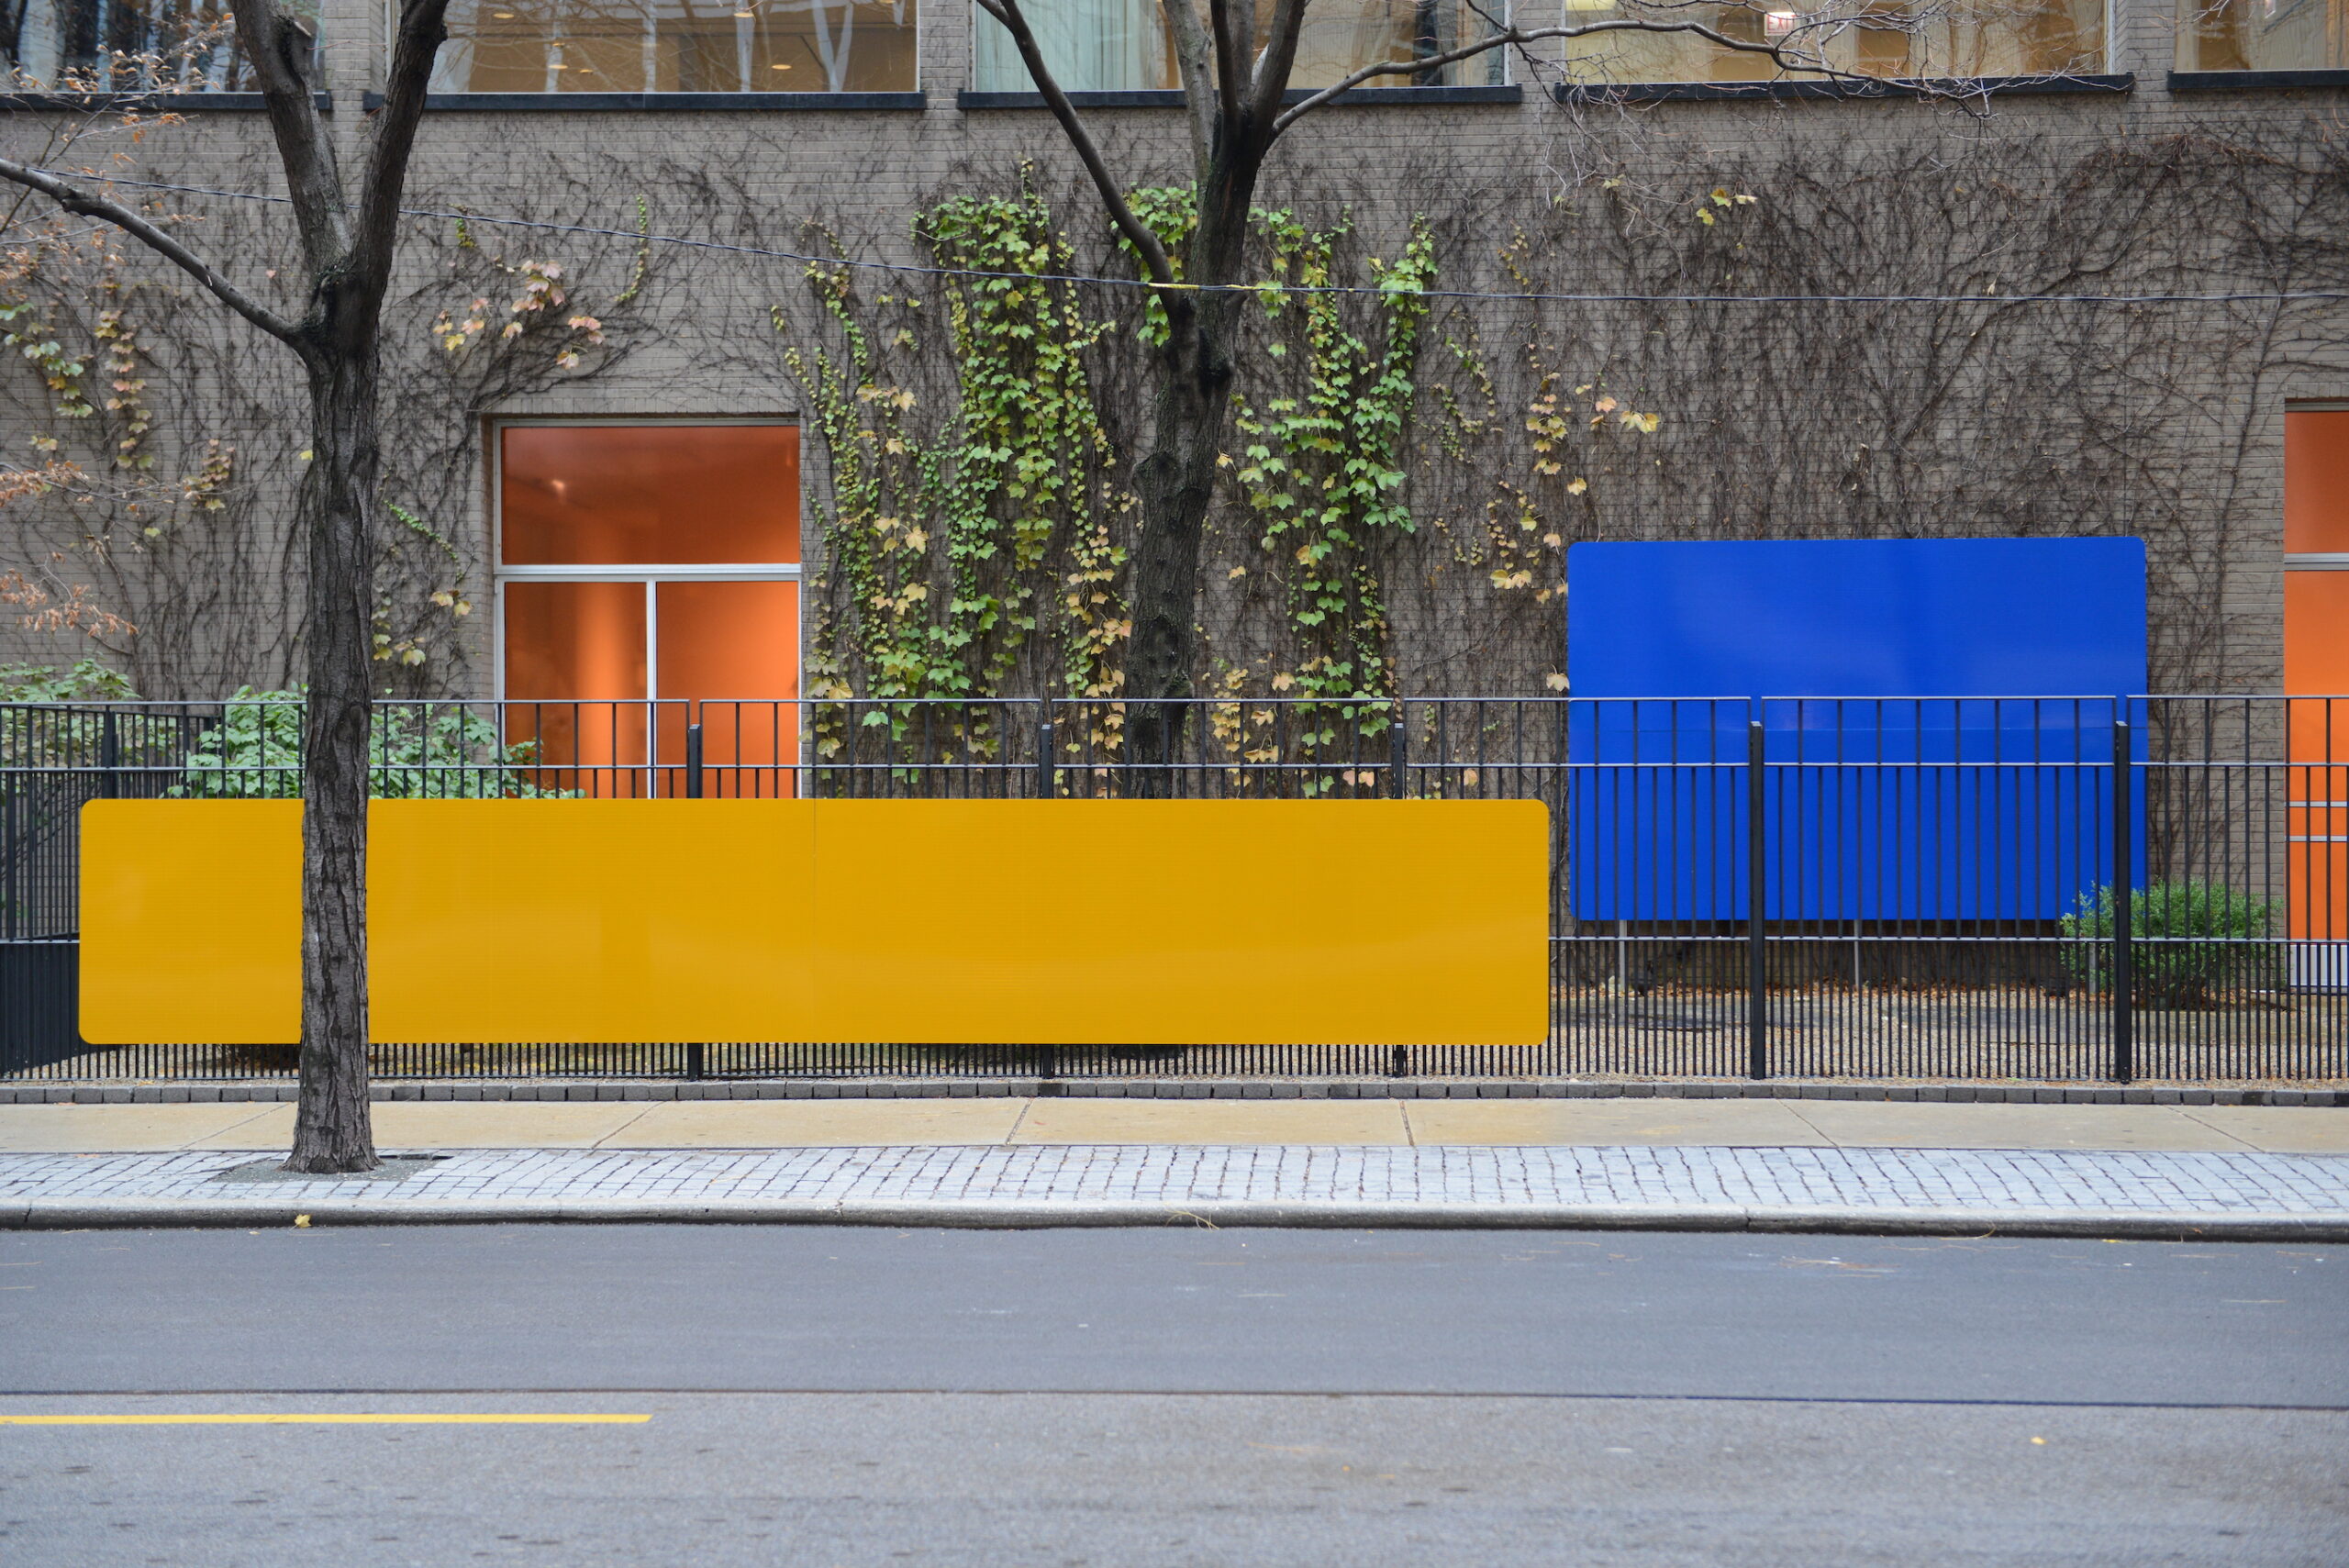 A long yellow rectangle hangs on a fence in front of a brick building while a smaller blue rectangle covers part of the building's ivy-covered wall.